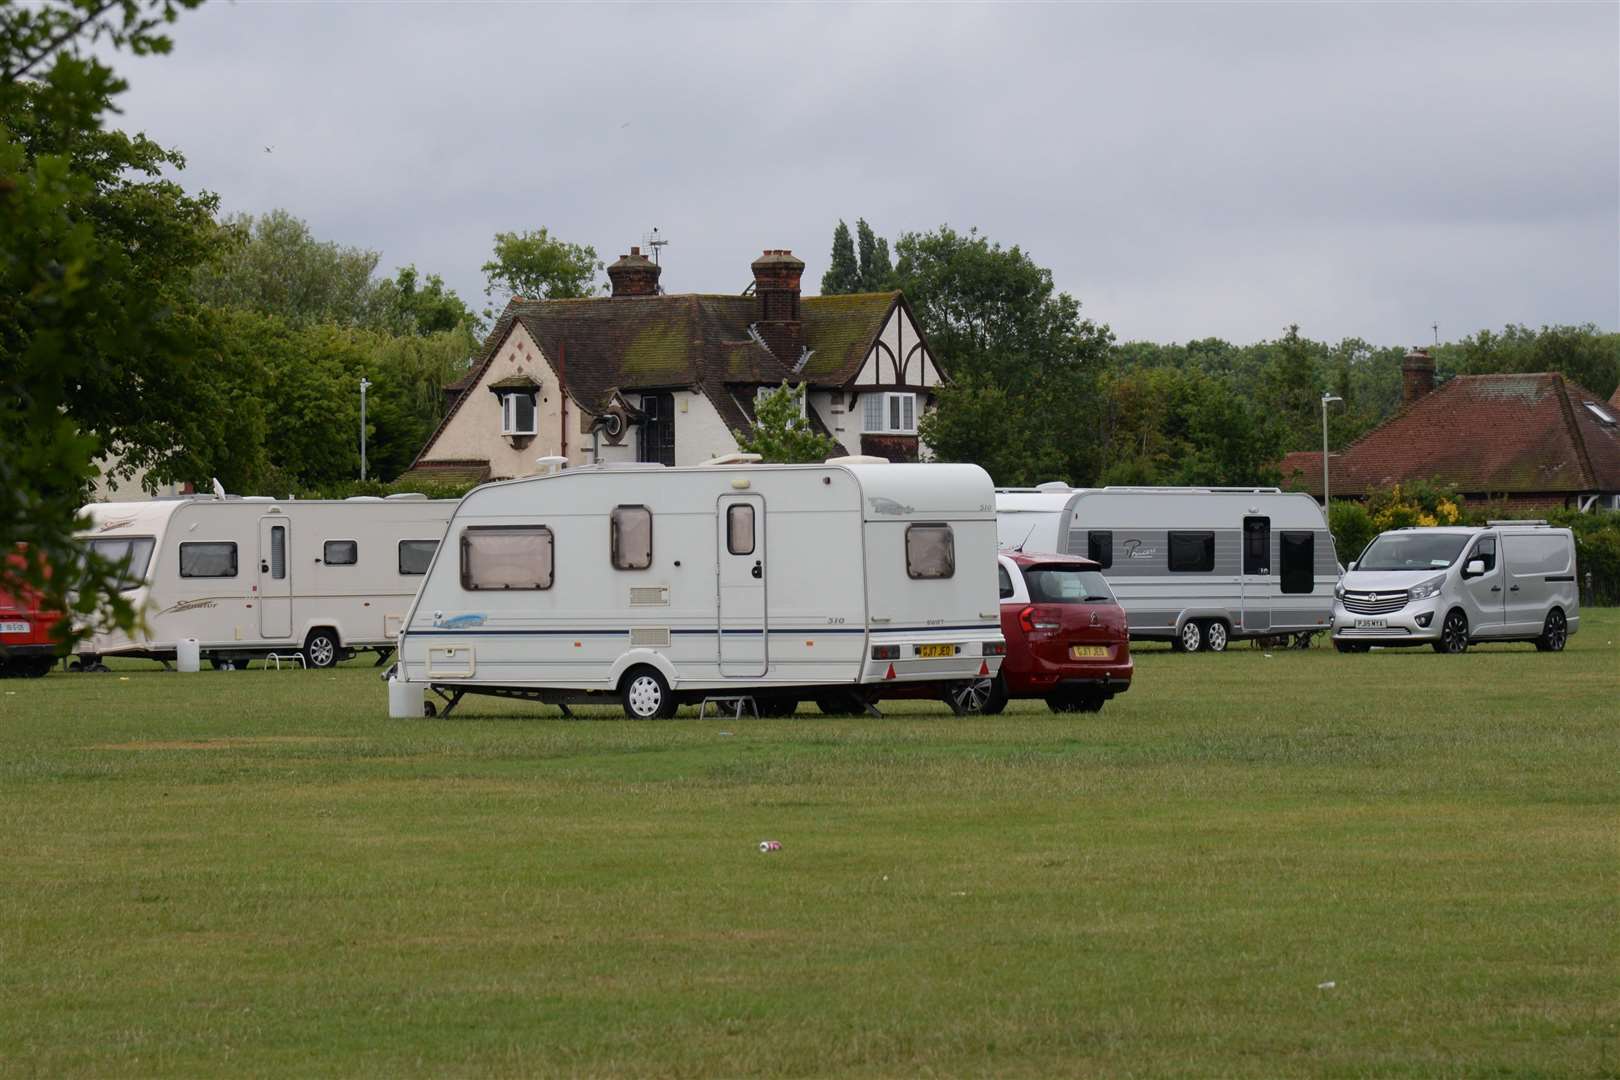 Travellers could soon be jailed if they pitch up on illegal camps